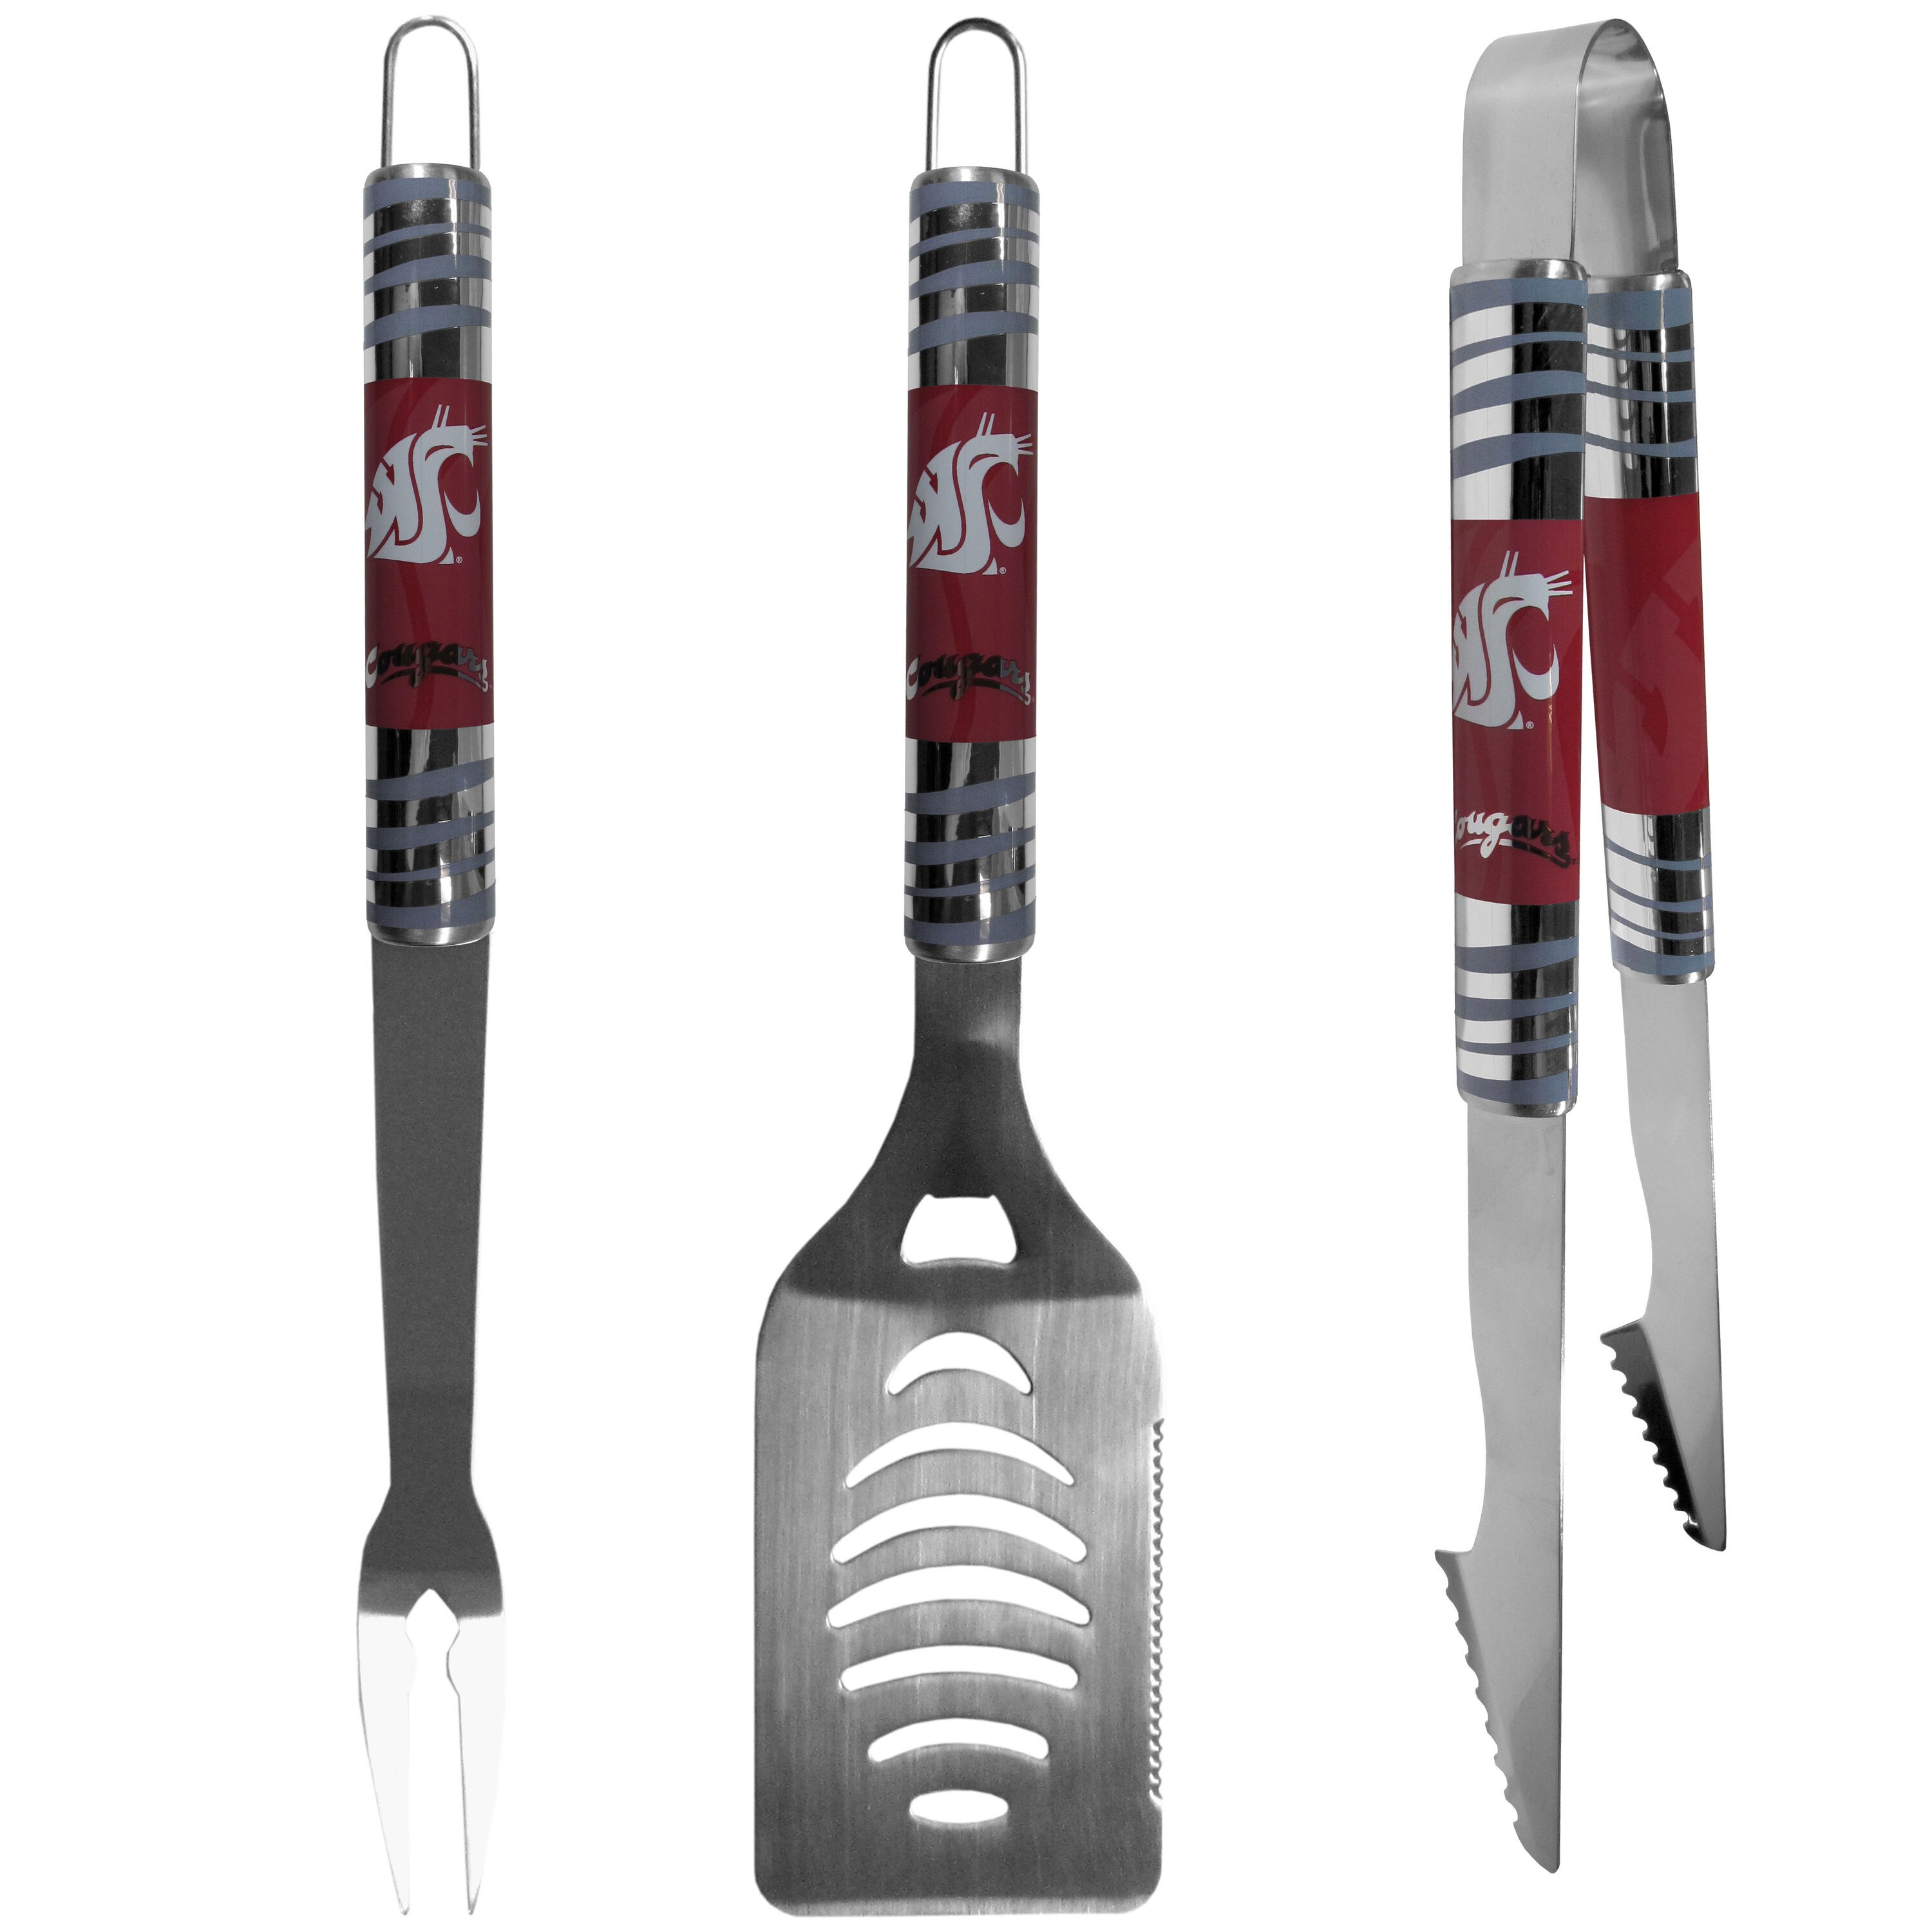 Siskiyou Gifts Co NCAA Stainless Steel BBQ Set Inc 